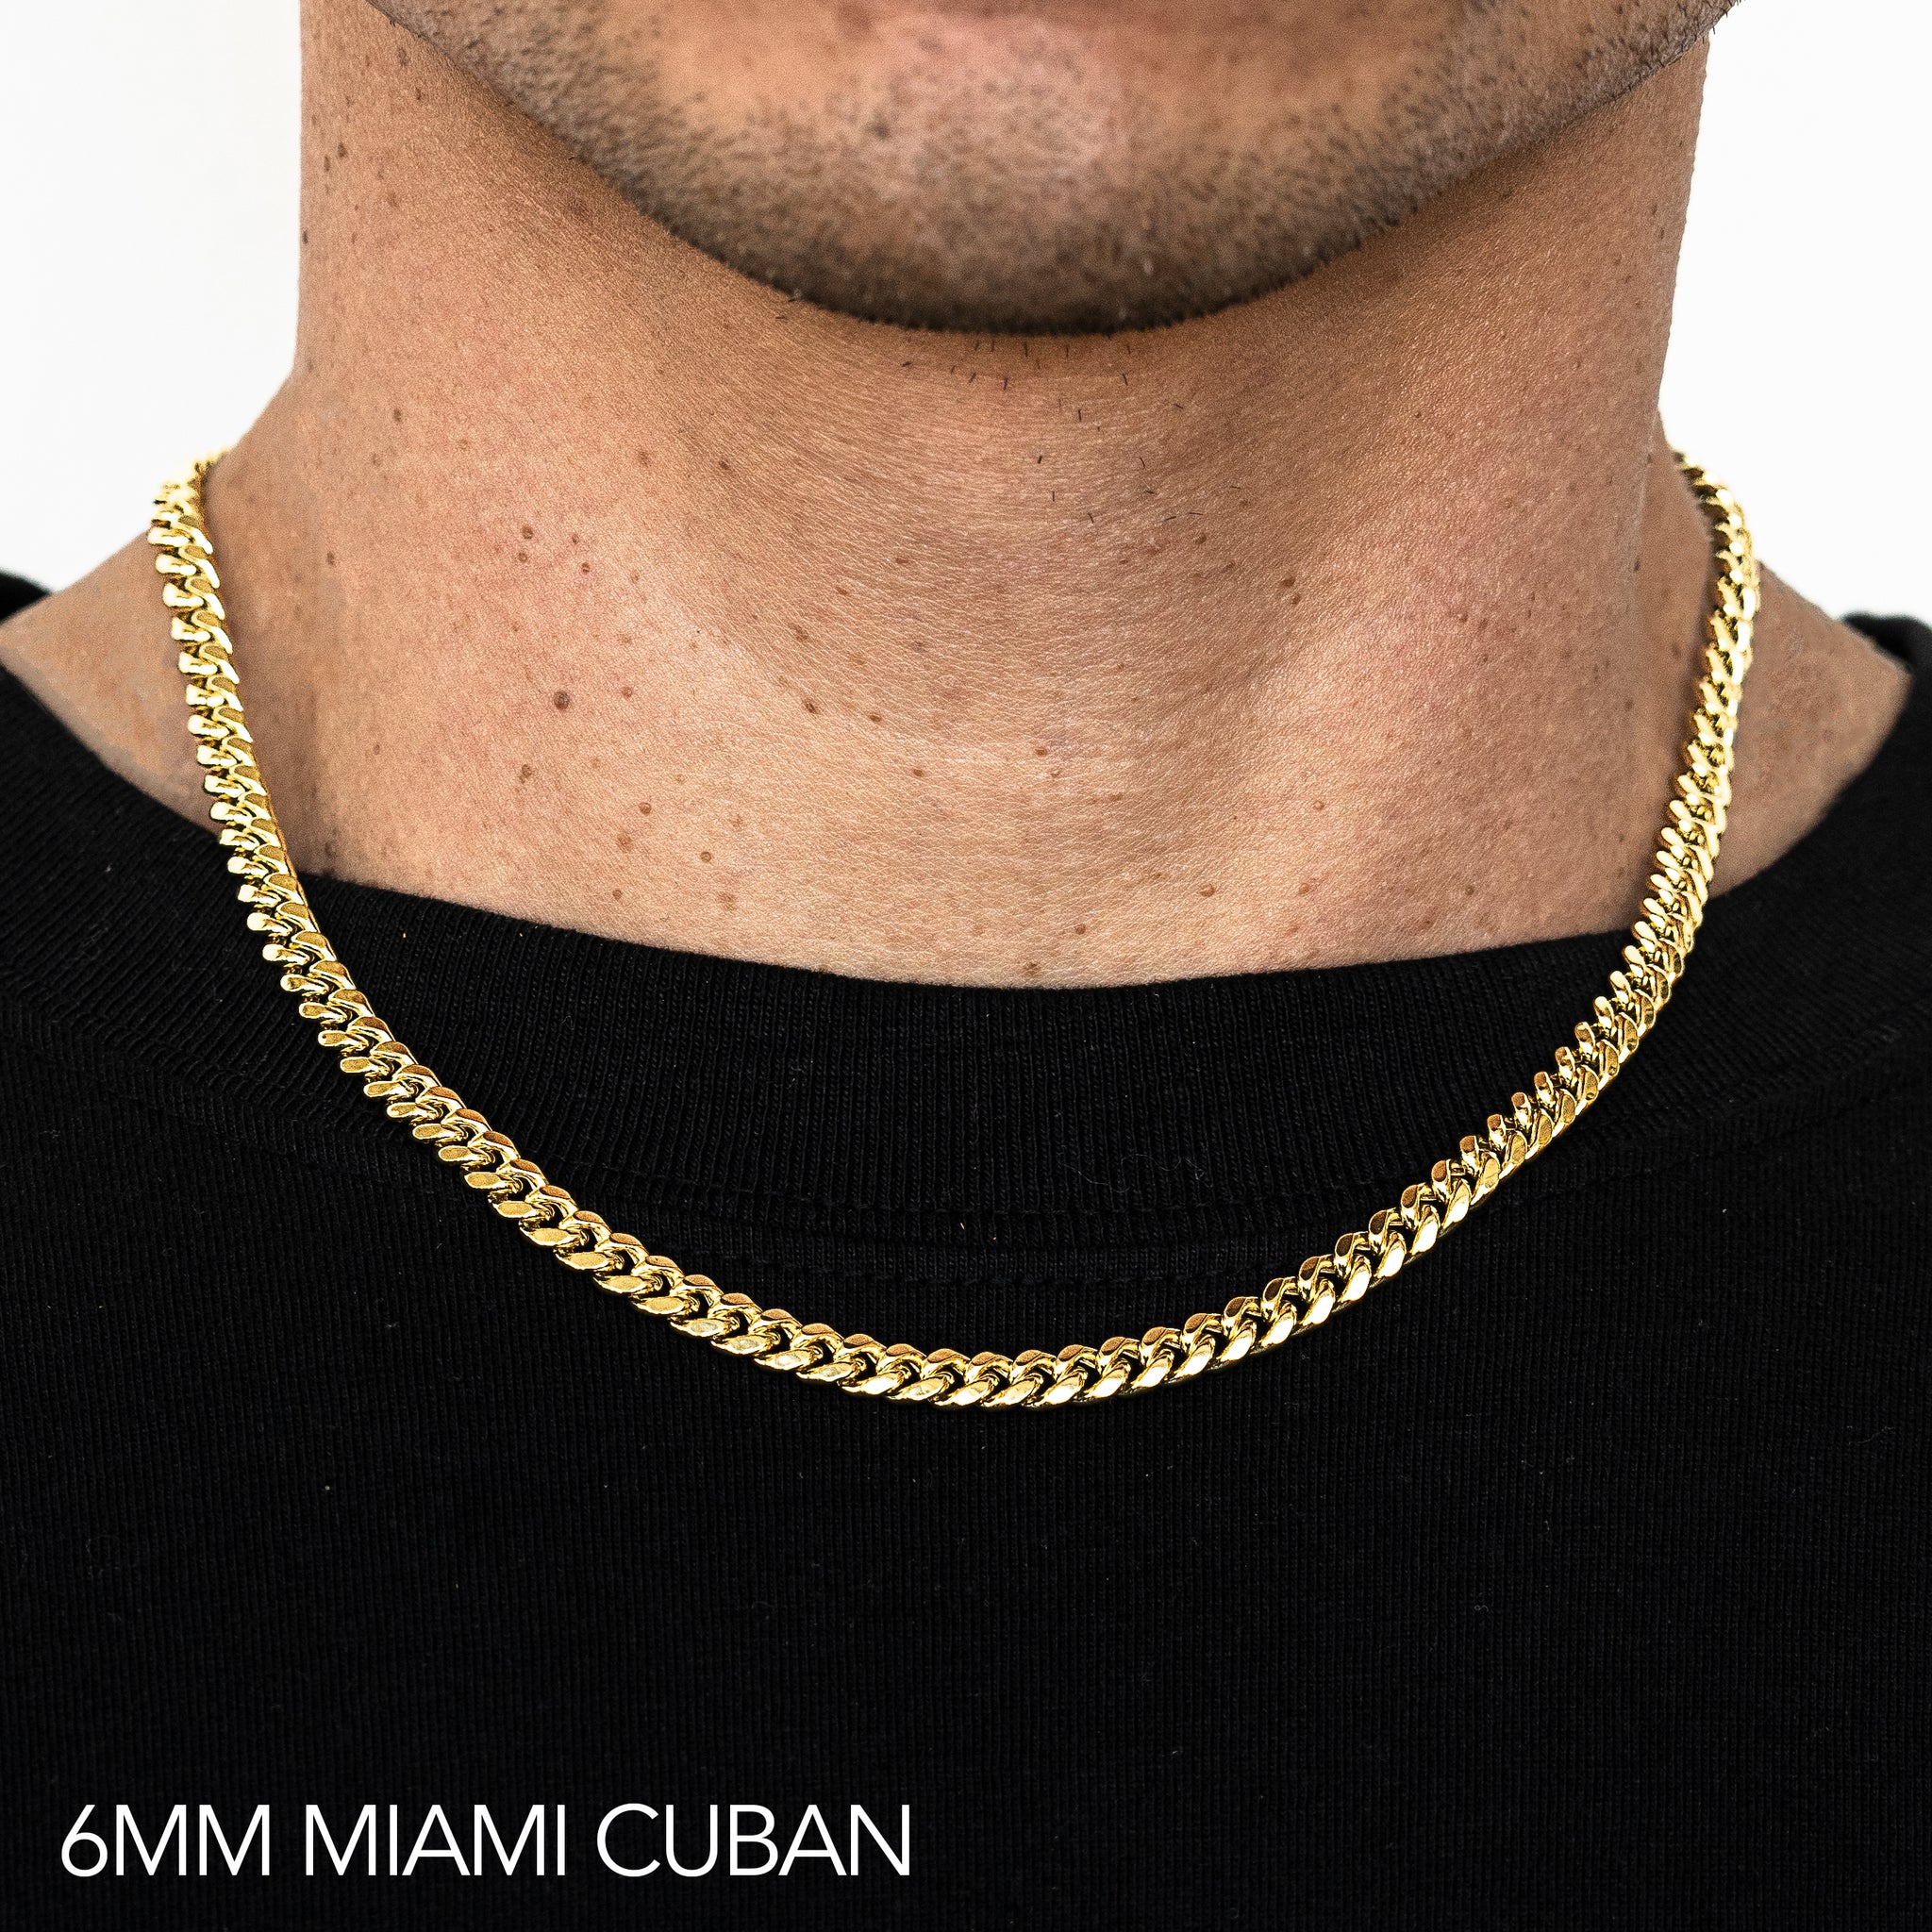 18K 6MM YELLOW GOLD SOLID MIAMI CUBAN 22" CHAIN NECKLACE (AVAILABLE IN LENGTHS 7" - 30")